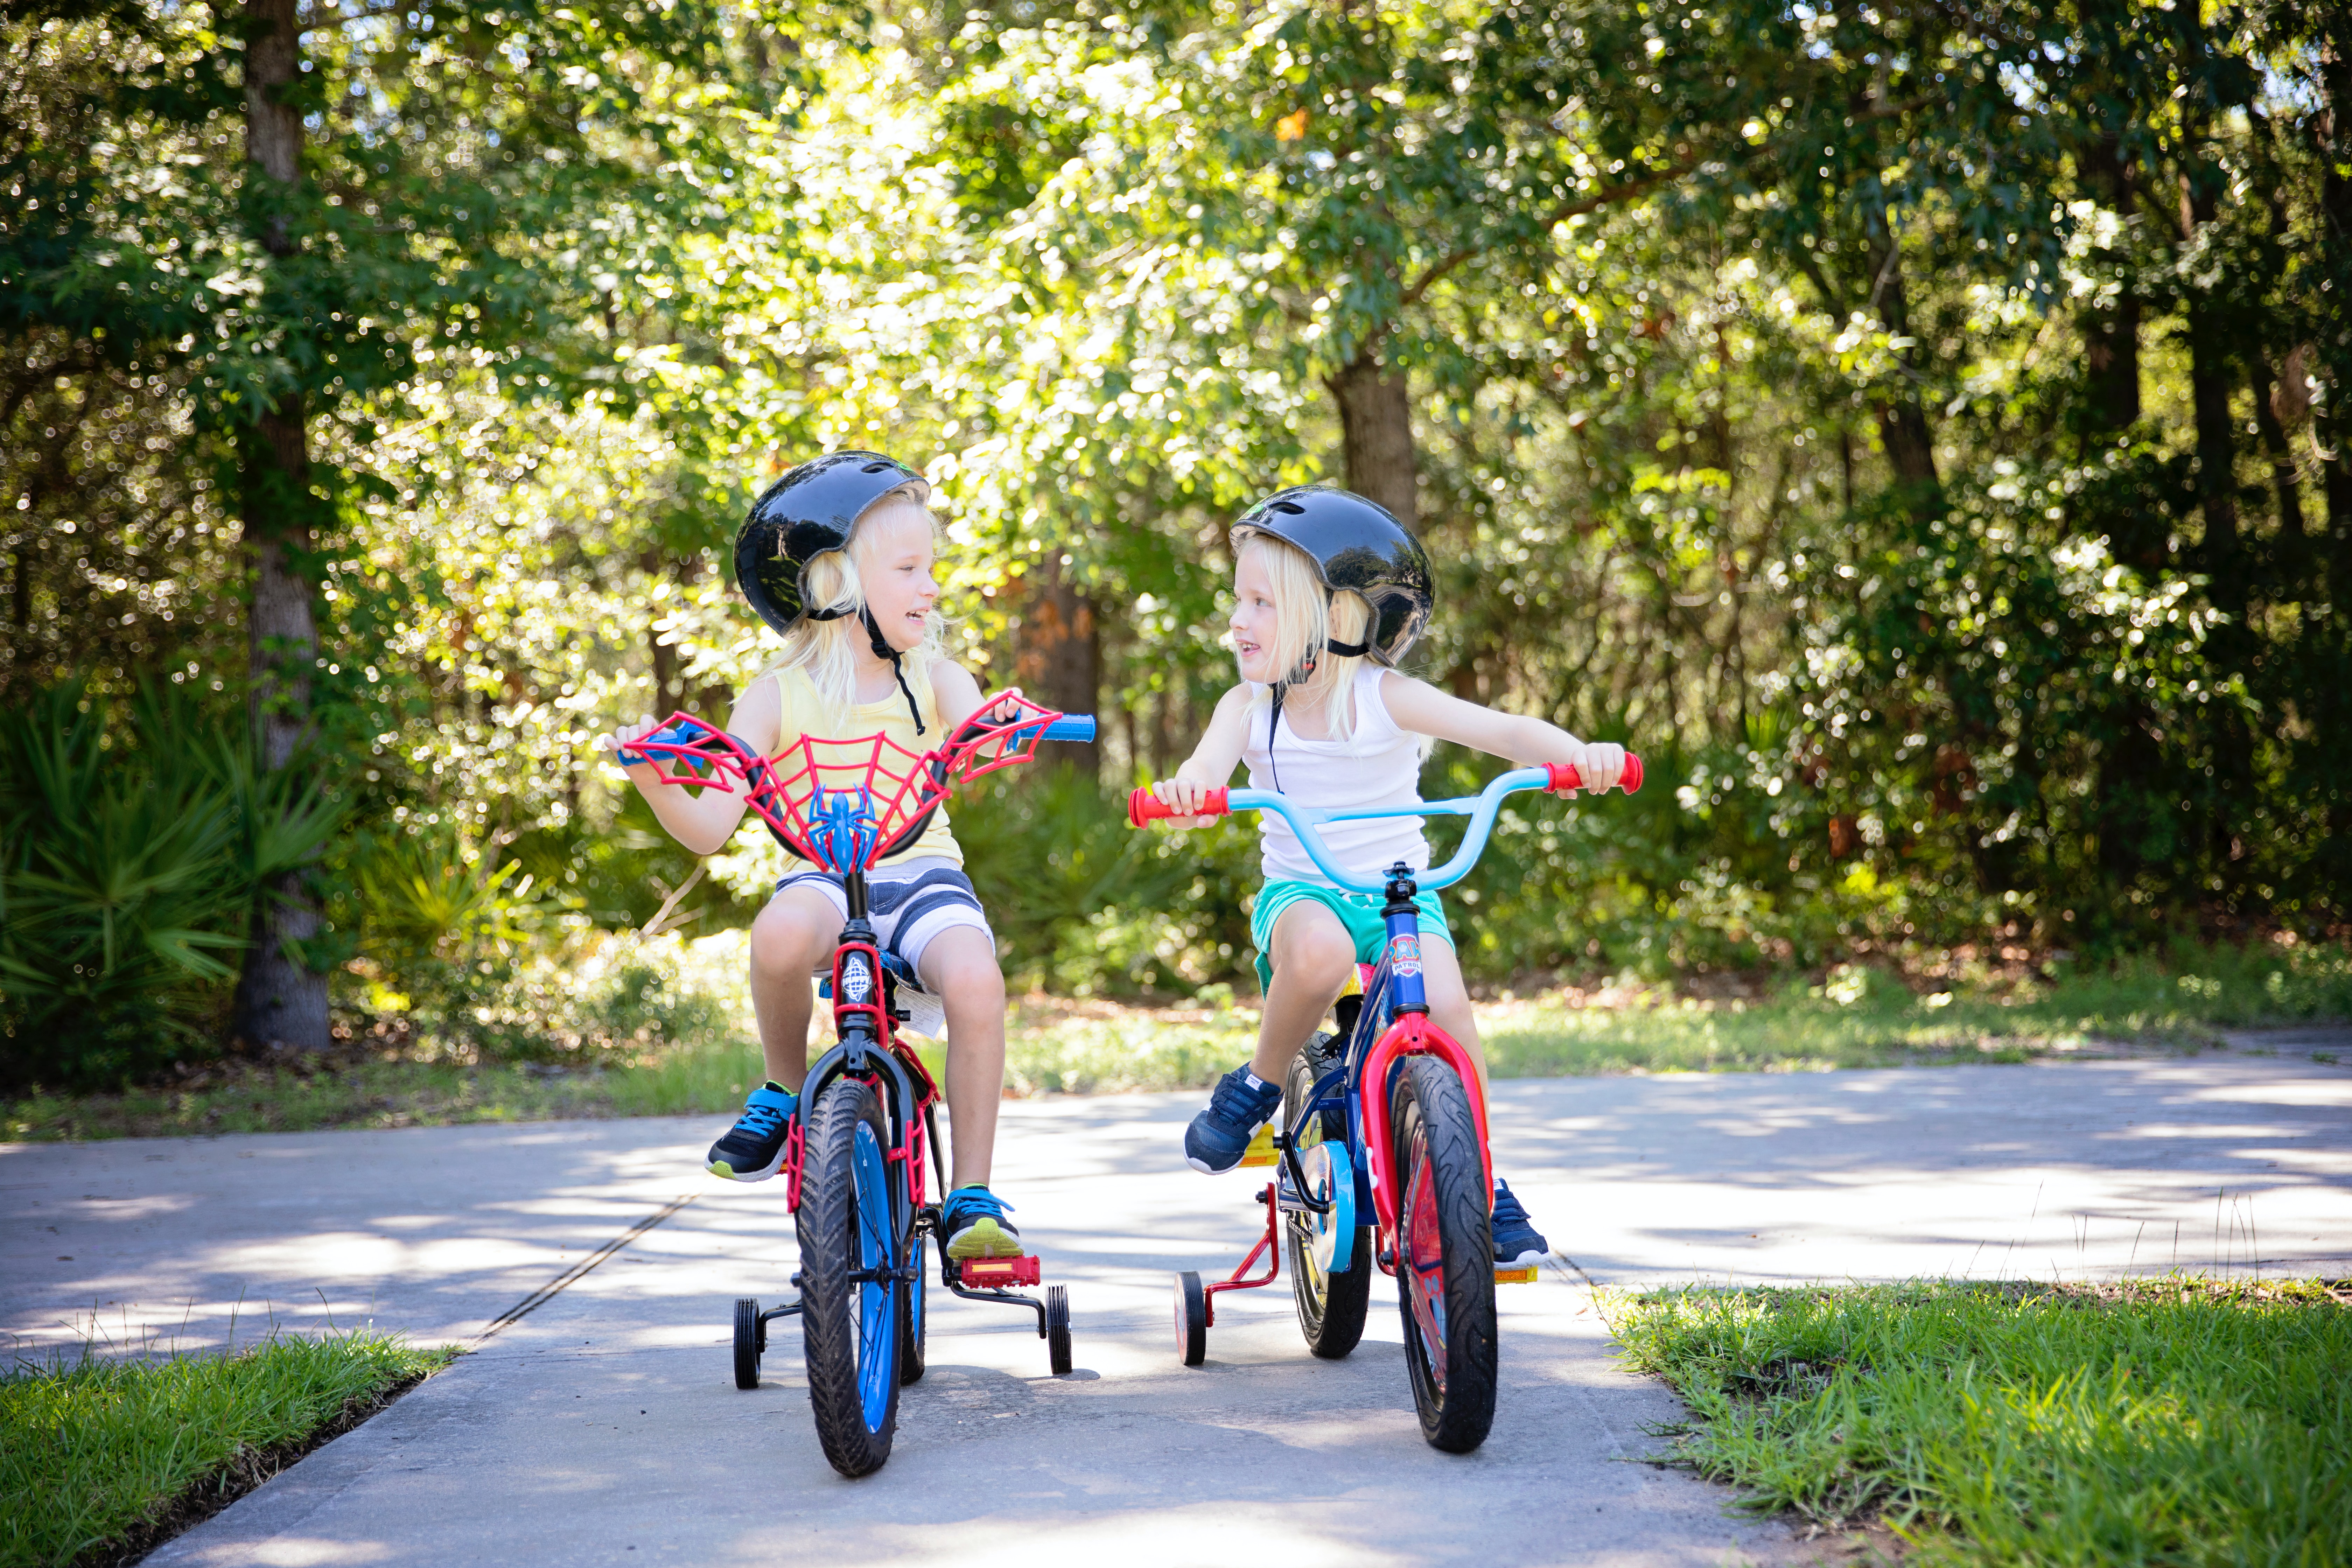 Churchich Recreation Keeping Kids Busy this Summer Without Electronics Two Kids on Bikes with Training Wheels Smiling at each other